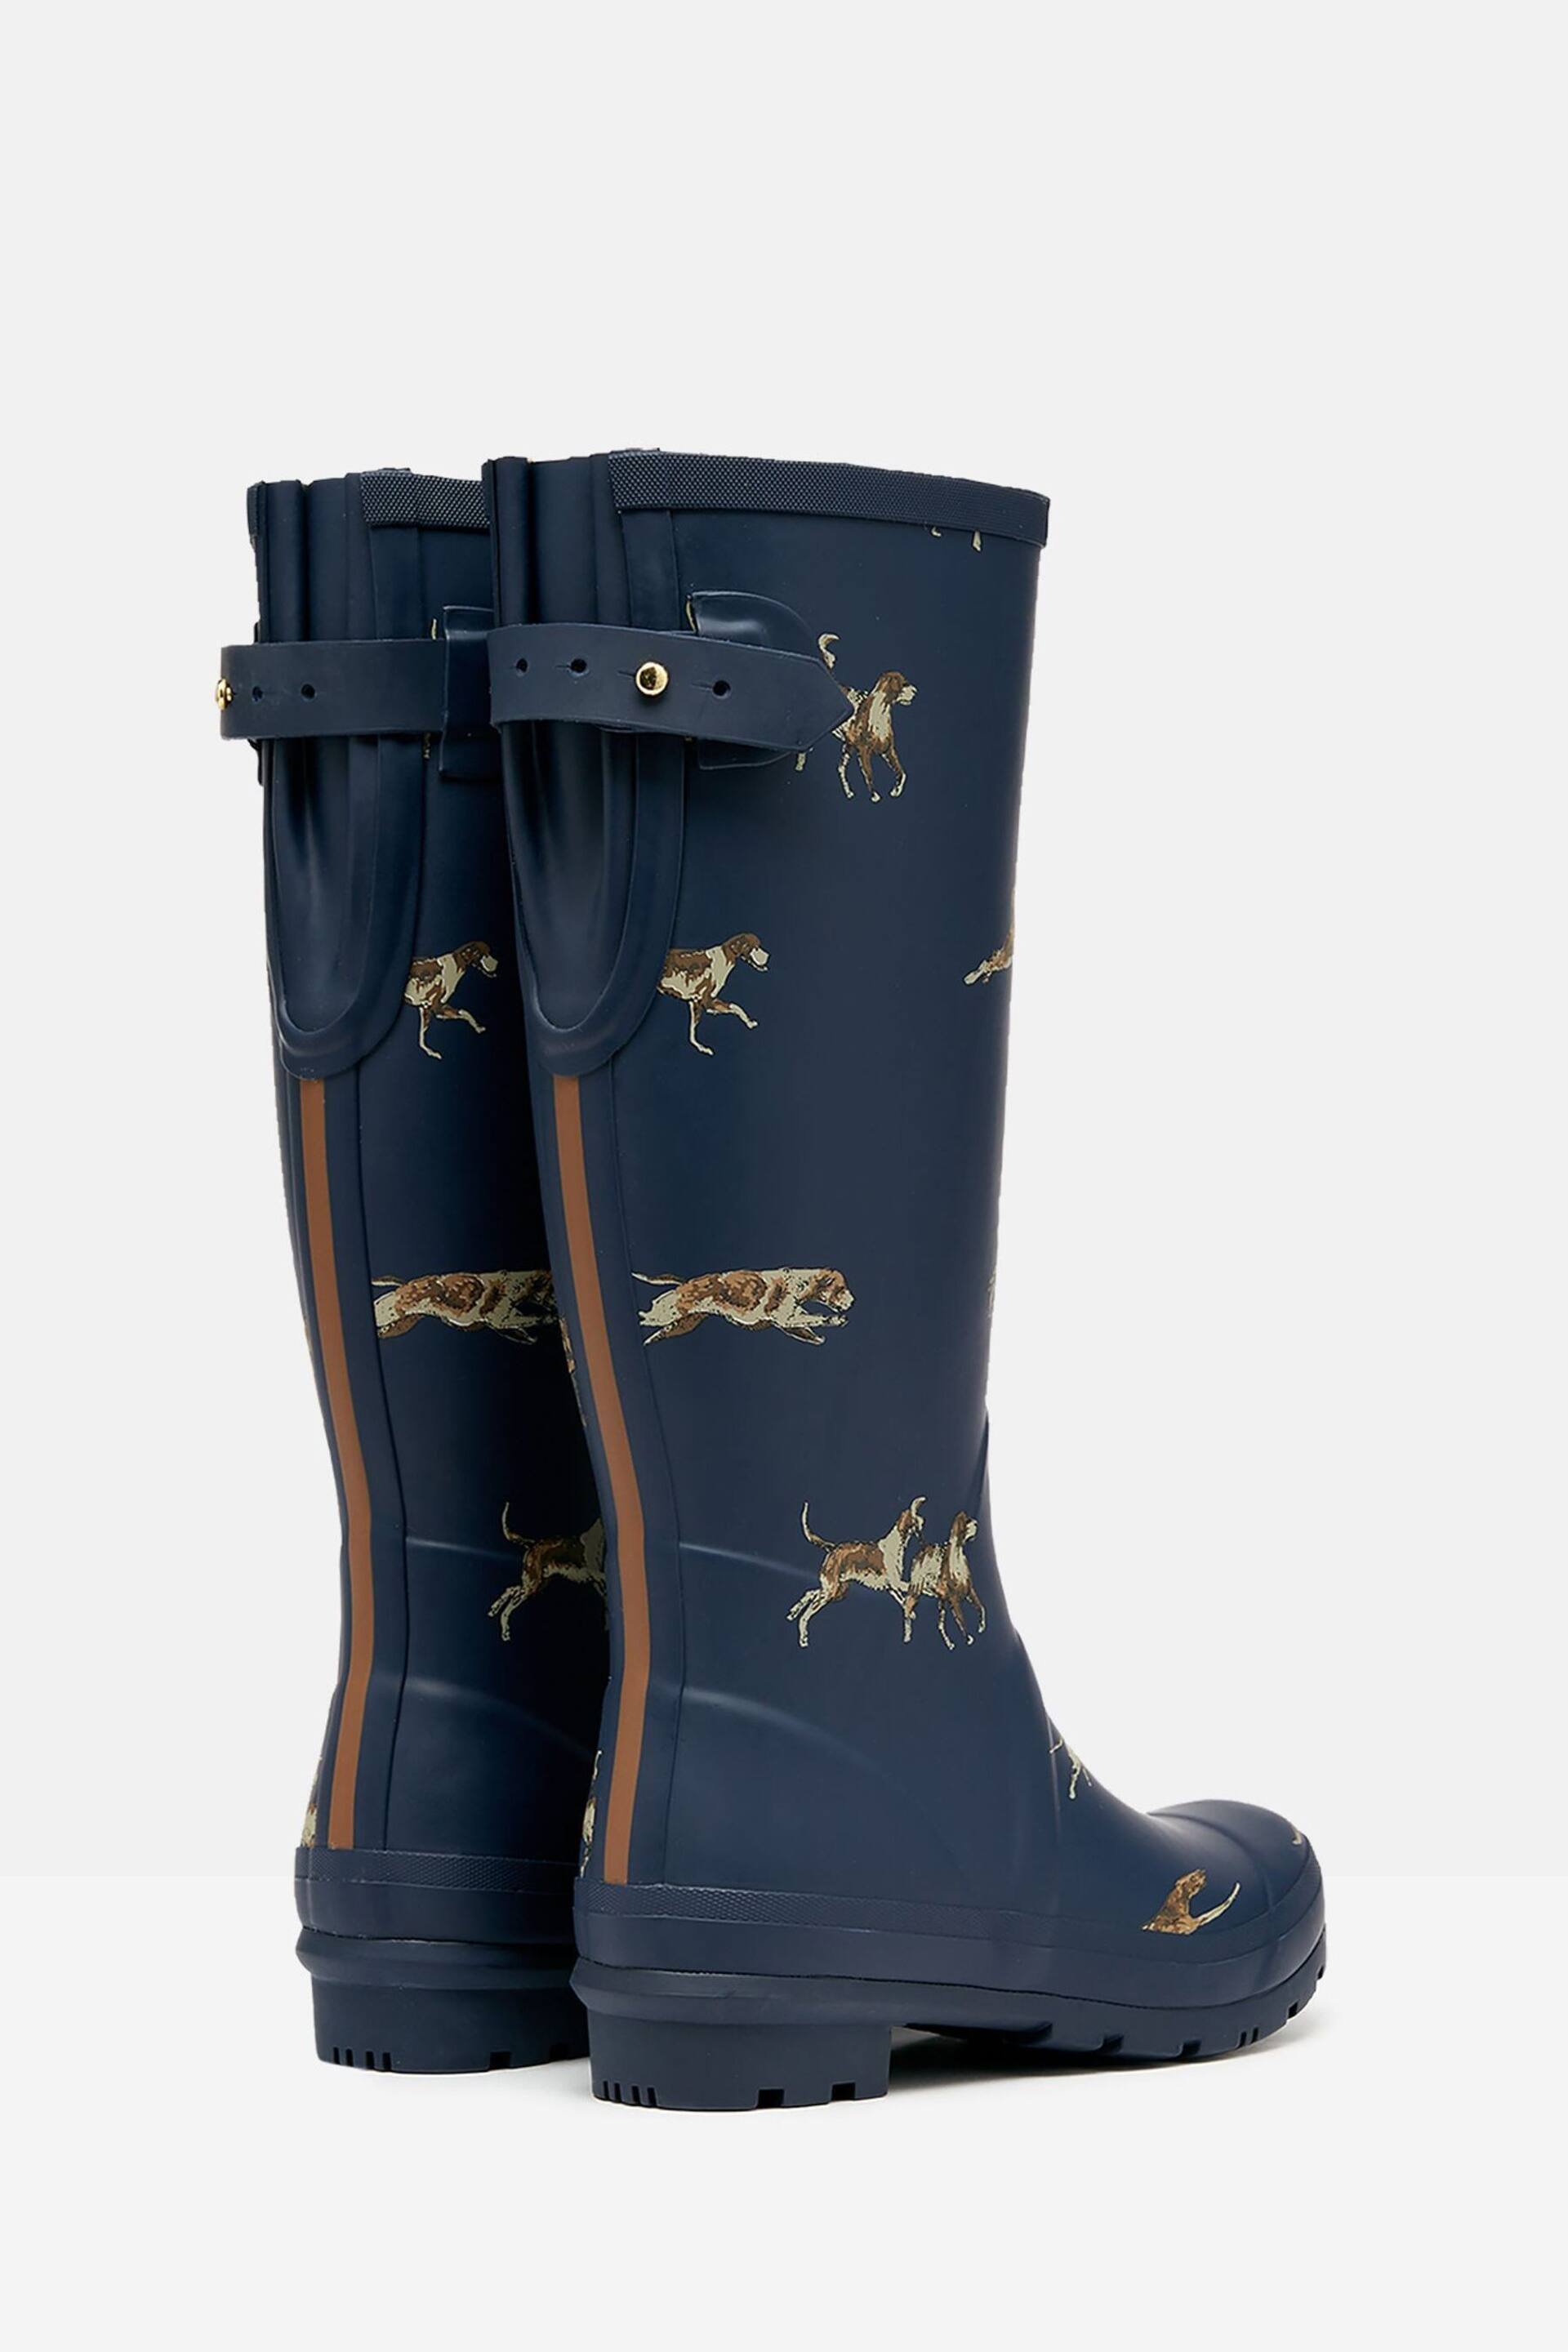 Joules Navy Blue Dog Print Adjustable Tall Wellies - Image 2 of 6